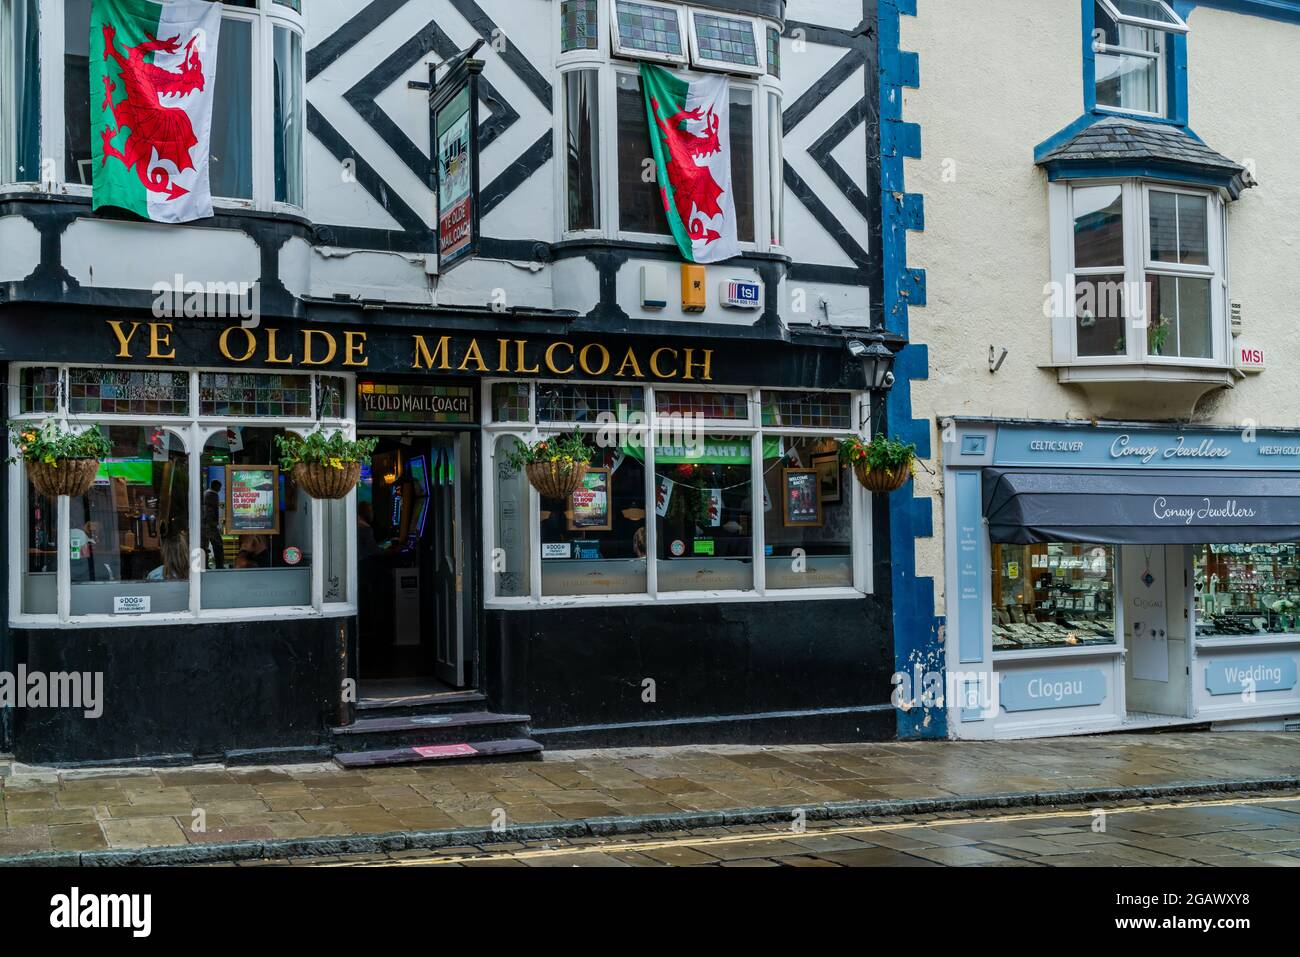 CONWY, WALES - JULY 04, 2021: Businesses on High Street in Conwy, Stock Photo